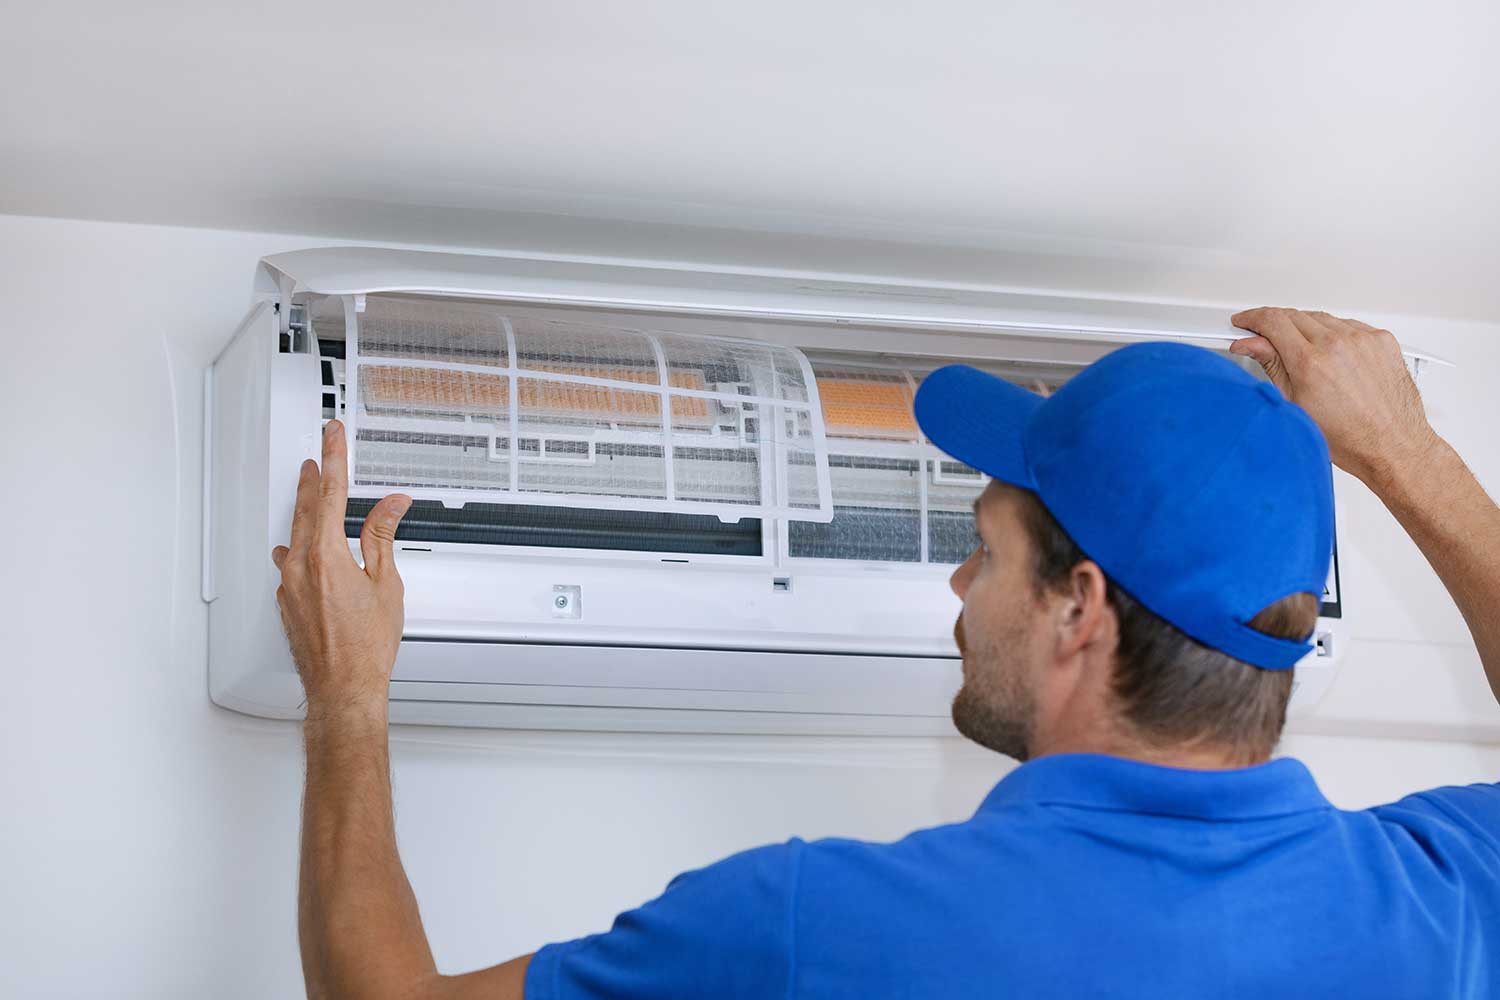 Making sure you have a fantastic agreement with your Heating and A/C provider